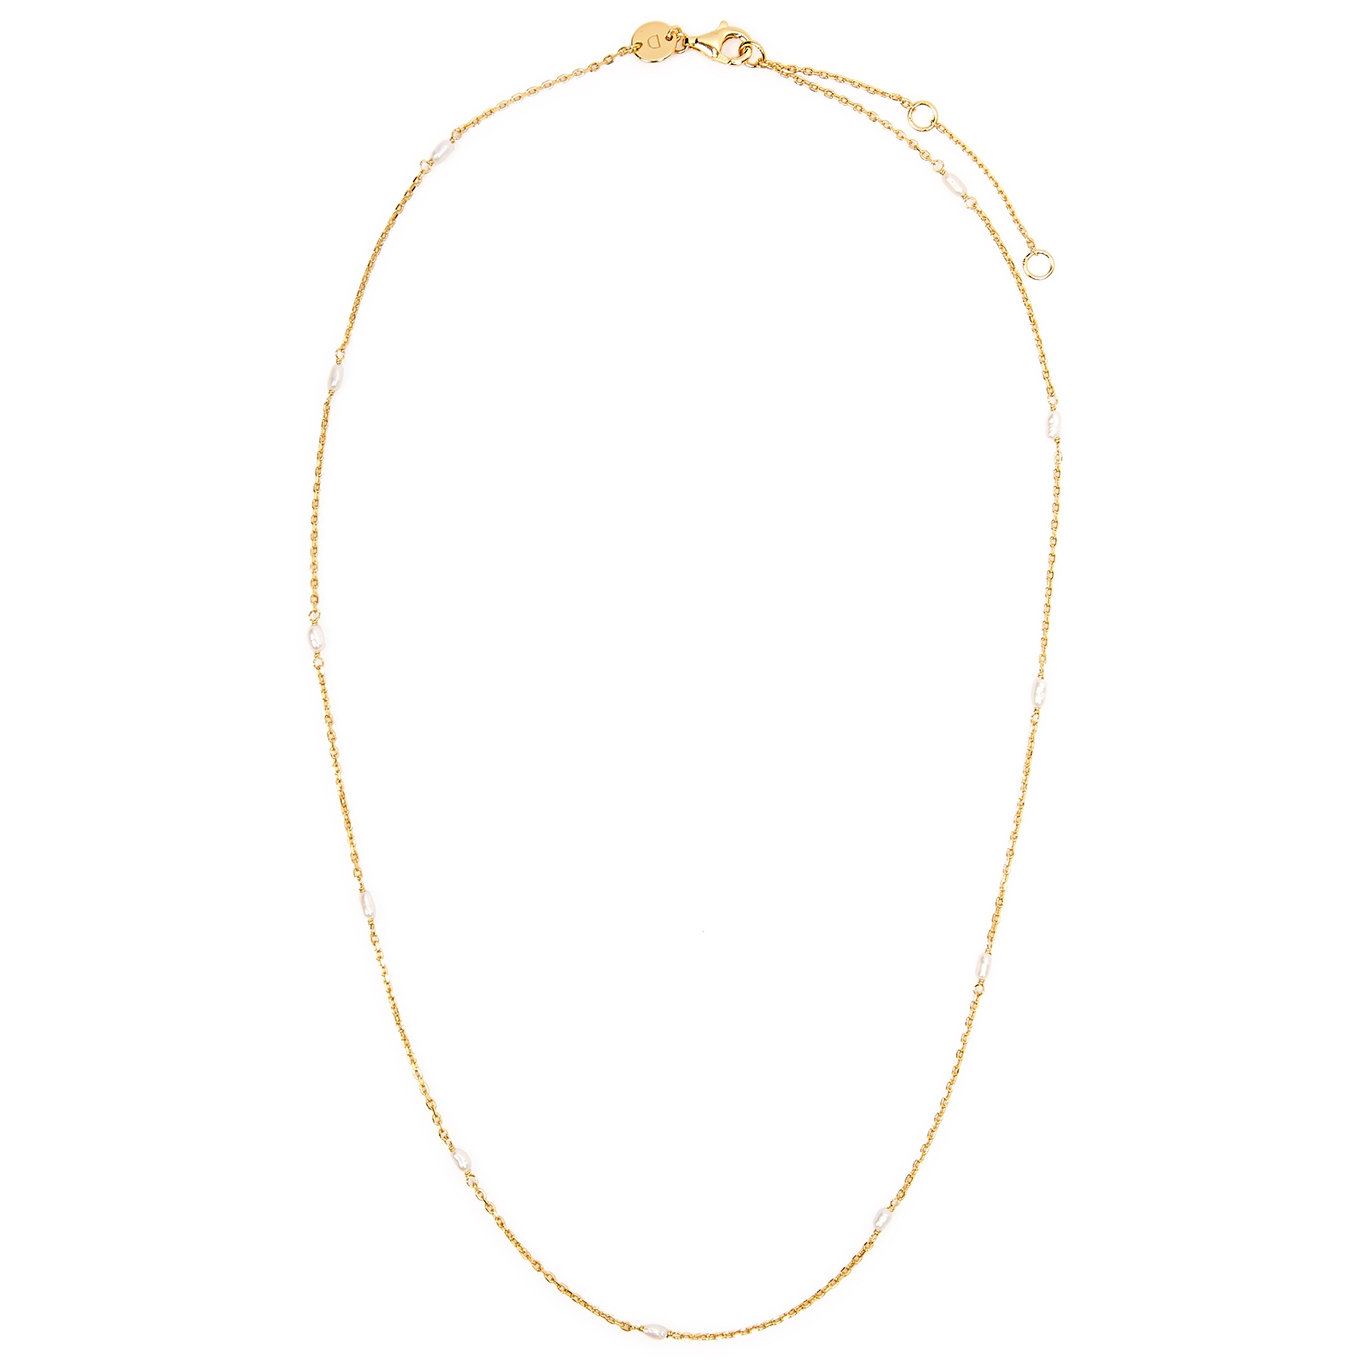 Daisy London Treasures Pearl-embellished Chain Necklace - Gold - One Size